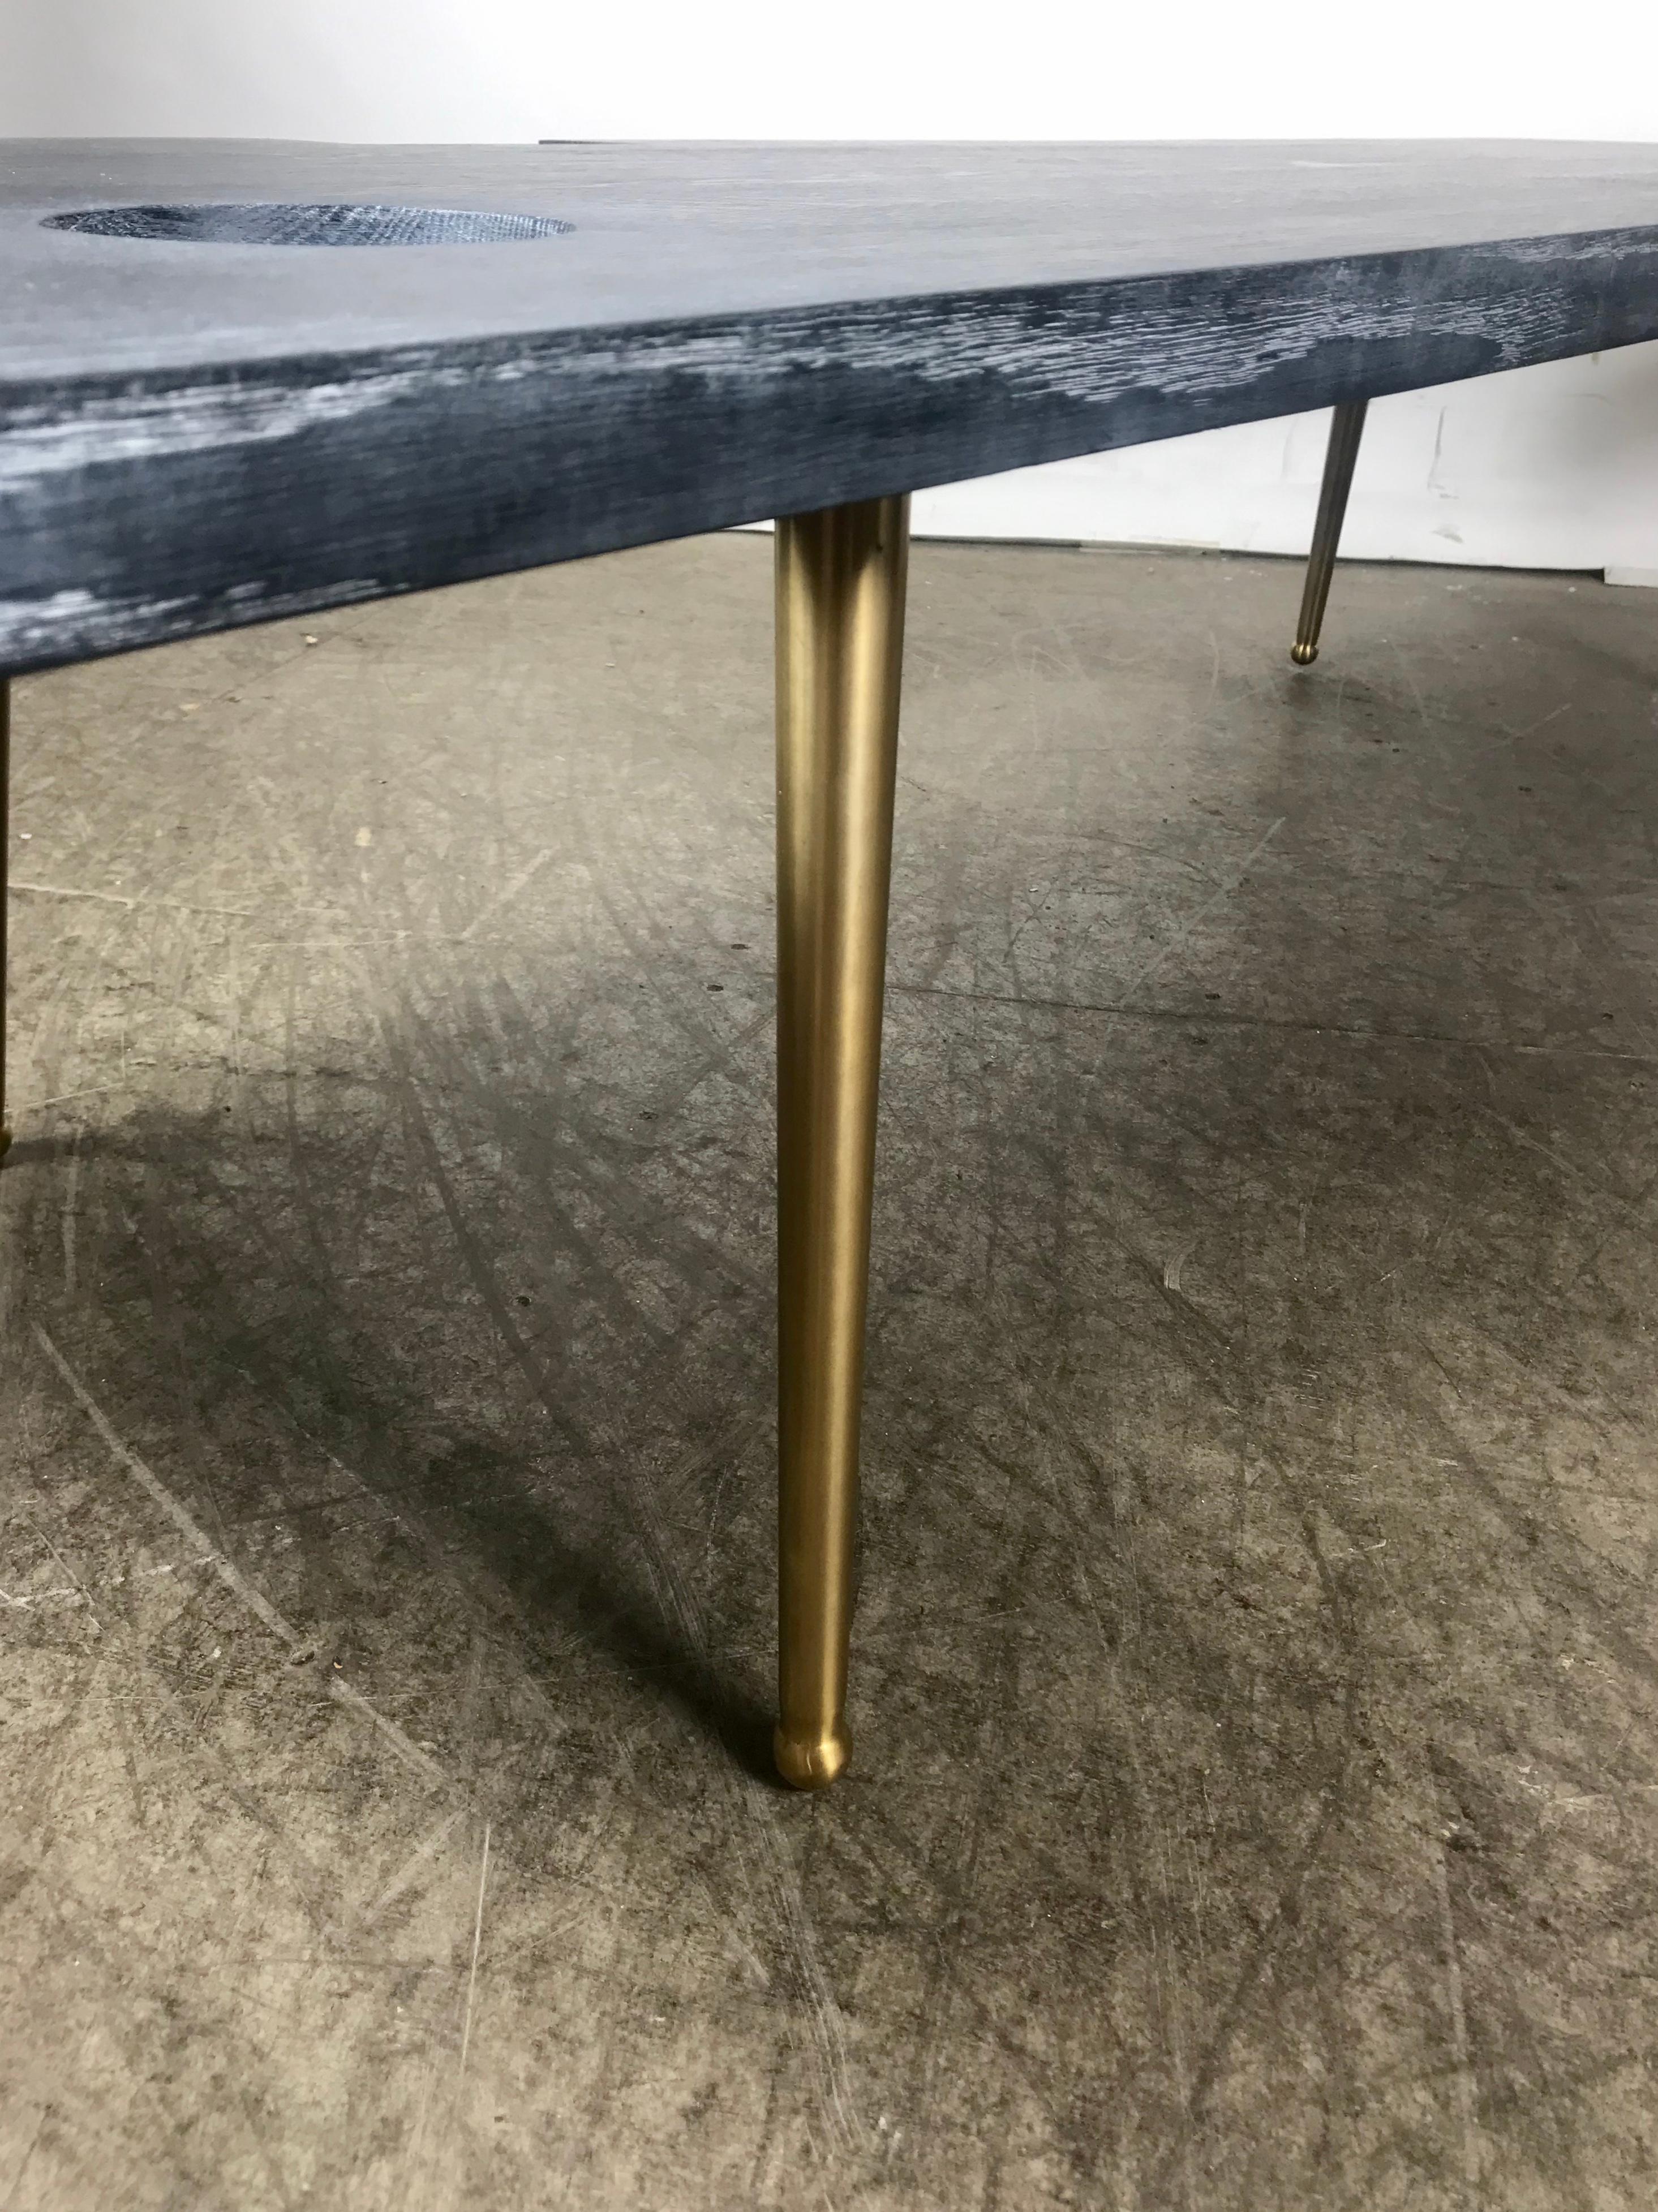 Modernist bespoke Cerused oak and brass coffee /cocktail table designed and bench made by John Tracey, Rochester NY artist, amazing architectural Bauhaus design, would fit seamlessly into any modern, contemporary environment, hand delivery avail to